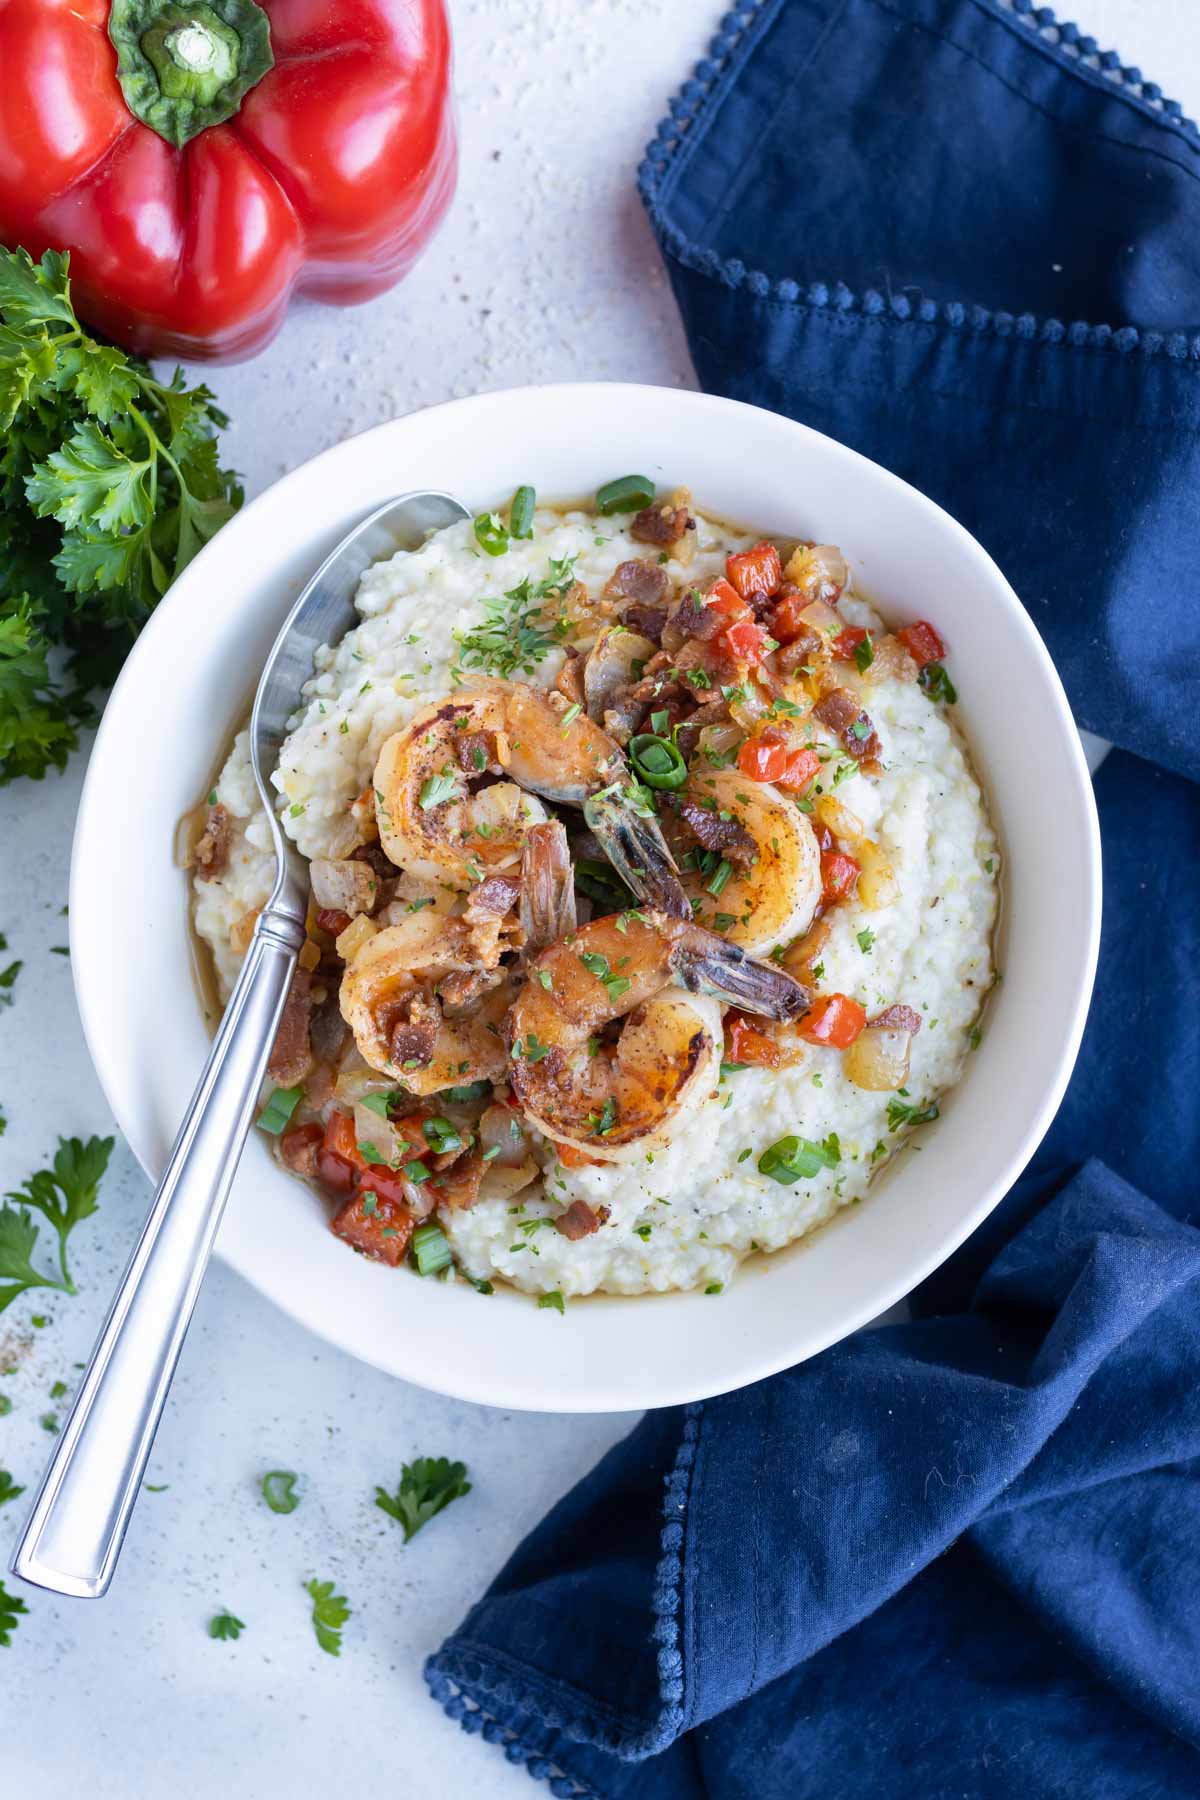 Parsley and chopped green onions are put on top of these Cajun shrimp and grits.